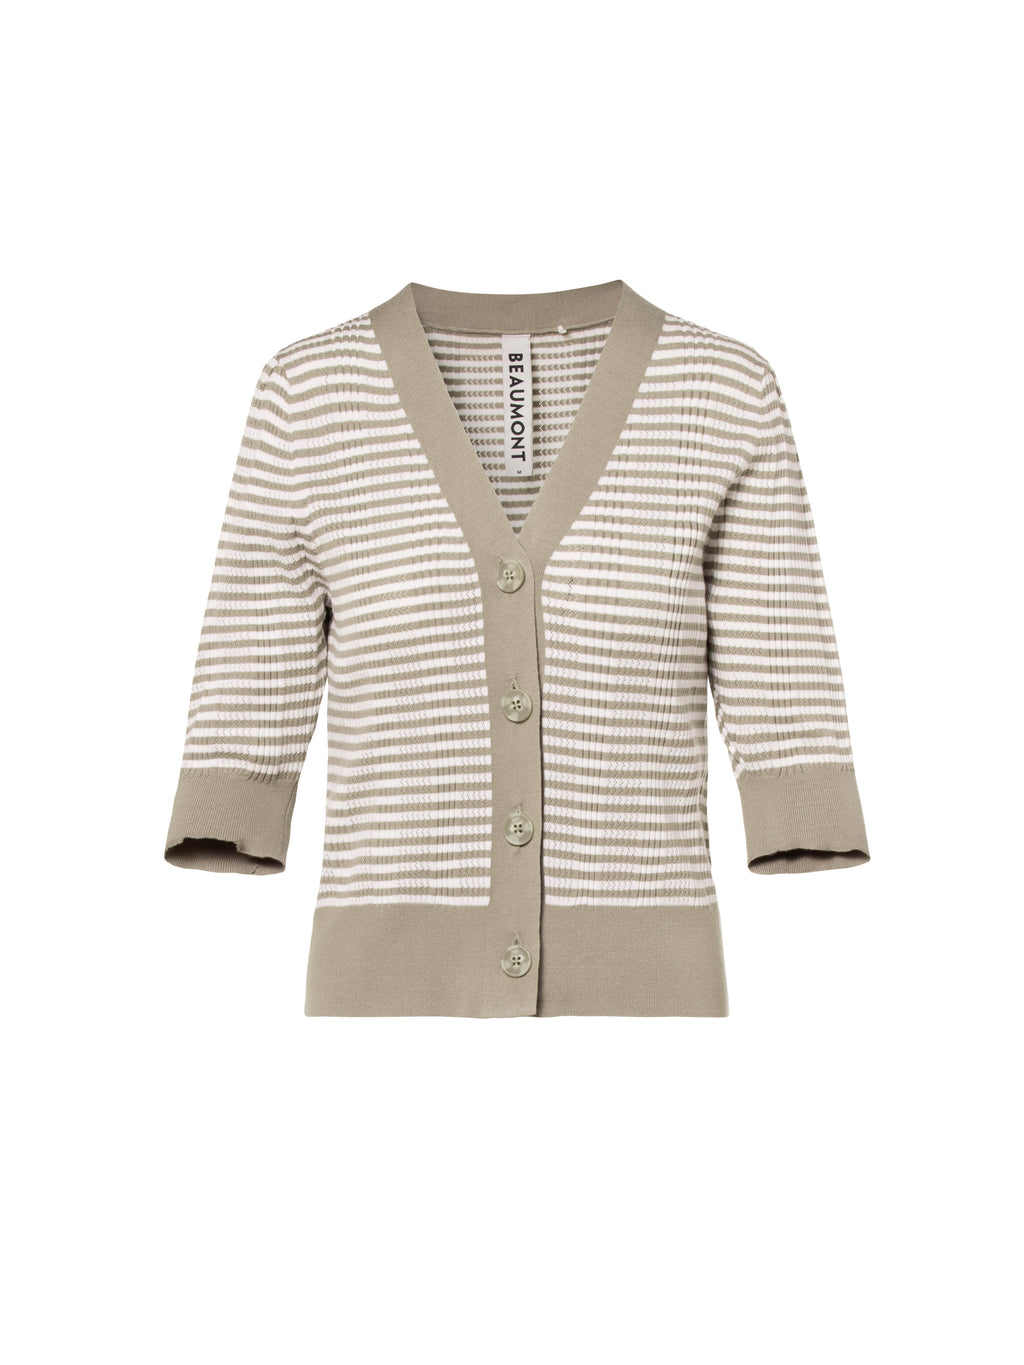 <p>Beaumont Finley horizontal stripe button up cardigan in khaki and white</p>
<p>Product code BC82540241</p>